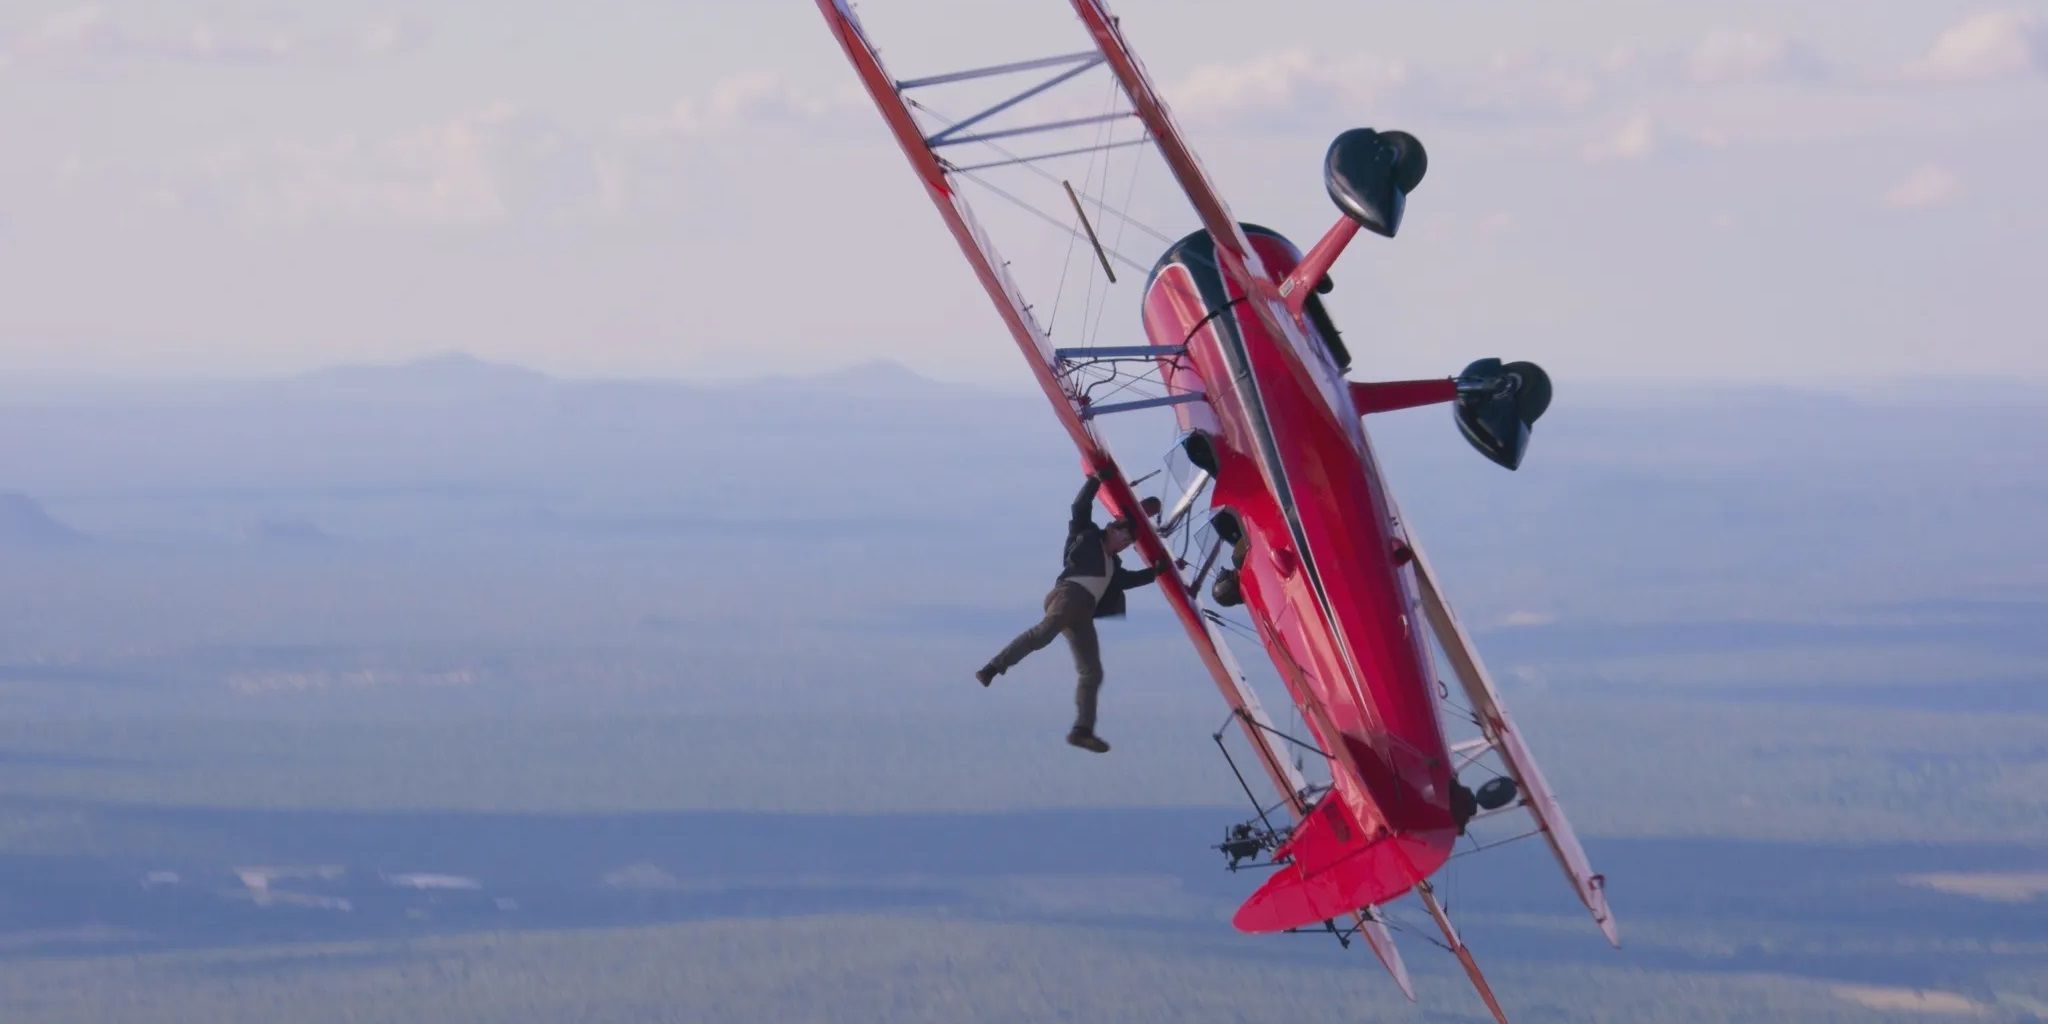 Tom Cruise hangs from a biplane in Mission Impossible Dead Reckoning Part One